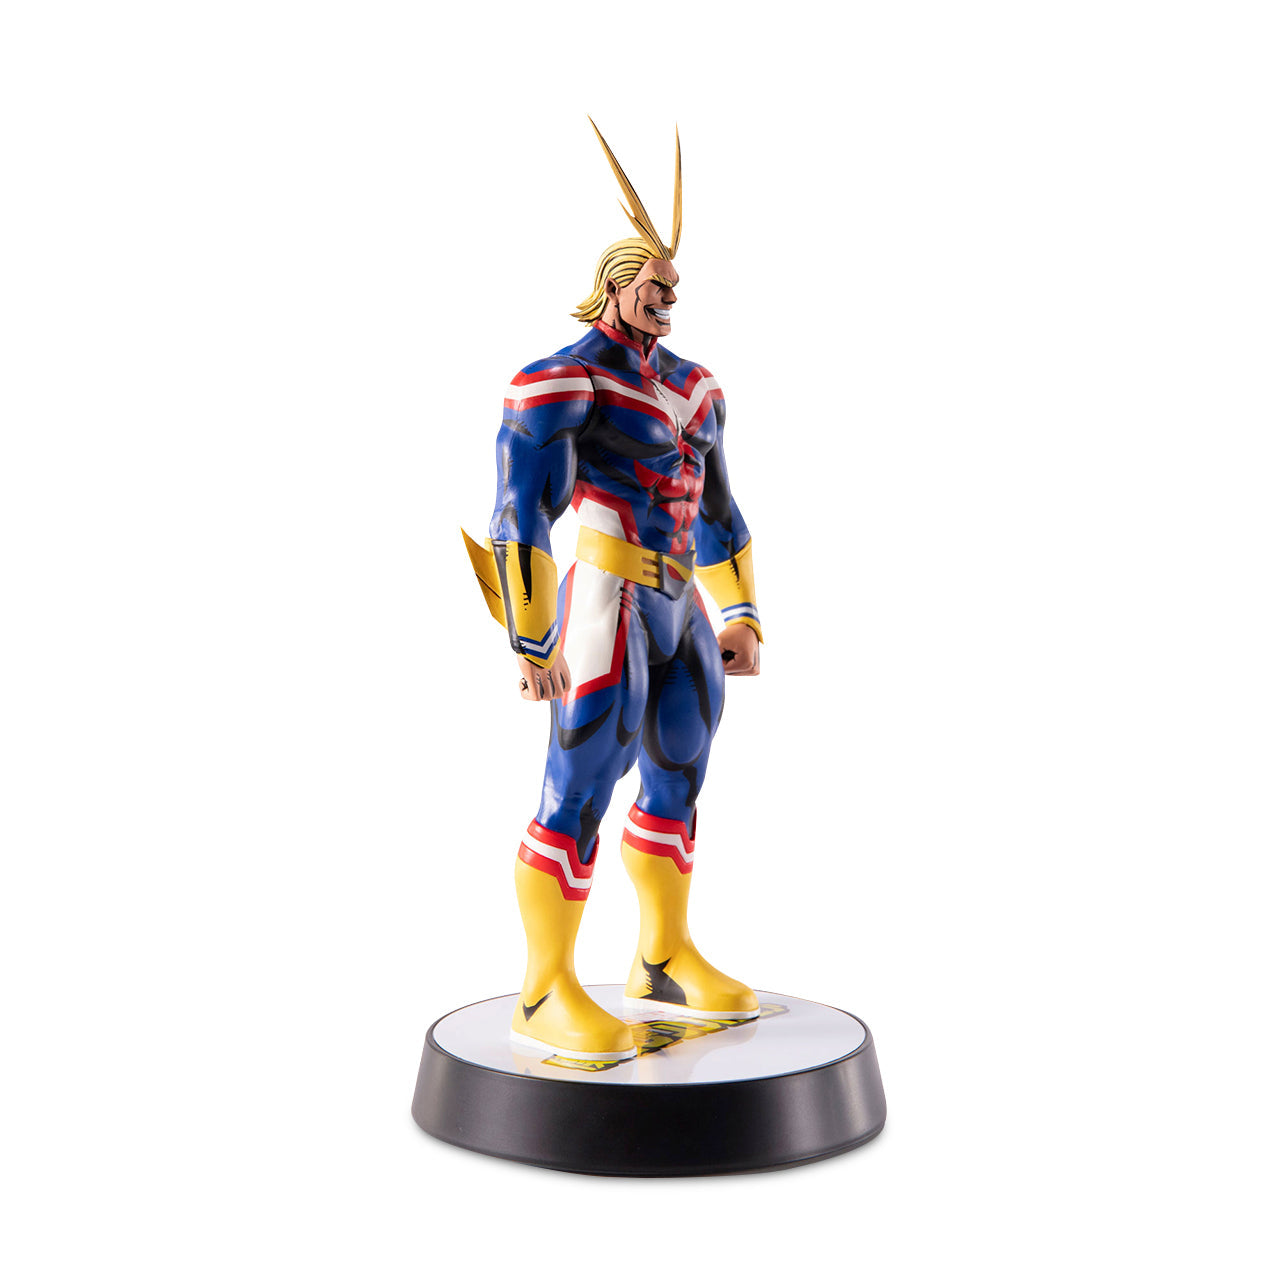 Bandai Anime Heroes All Might